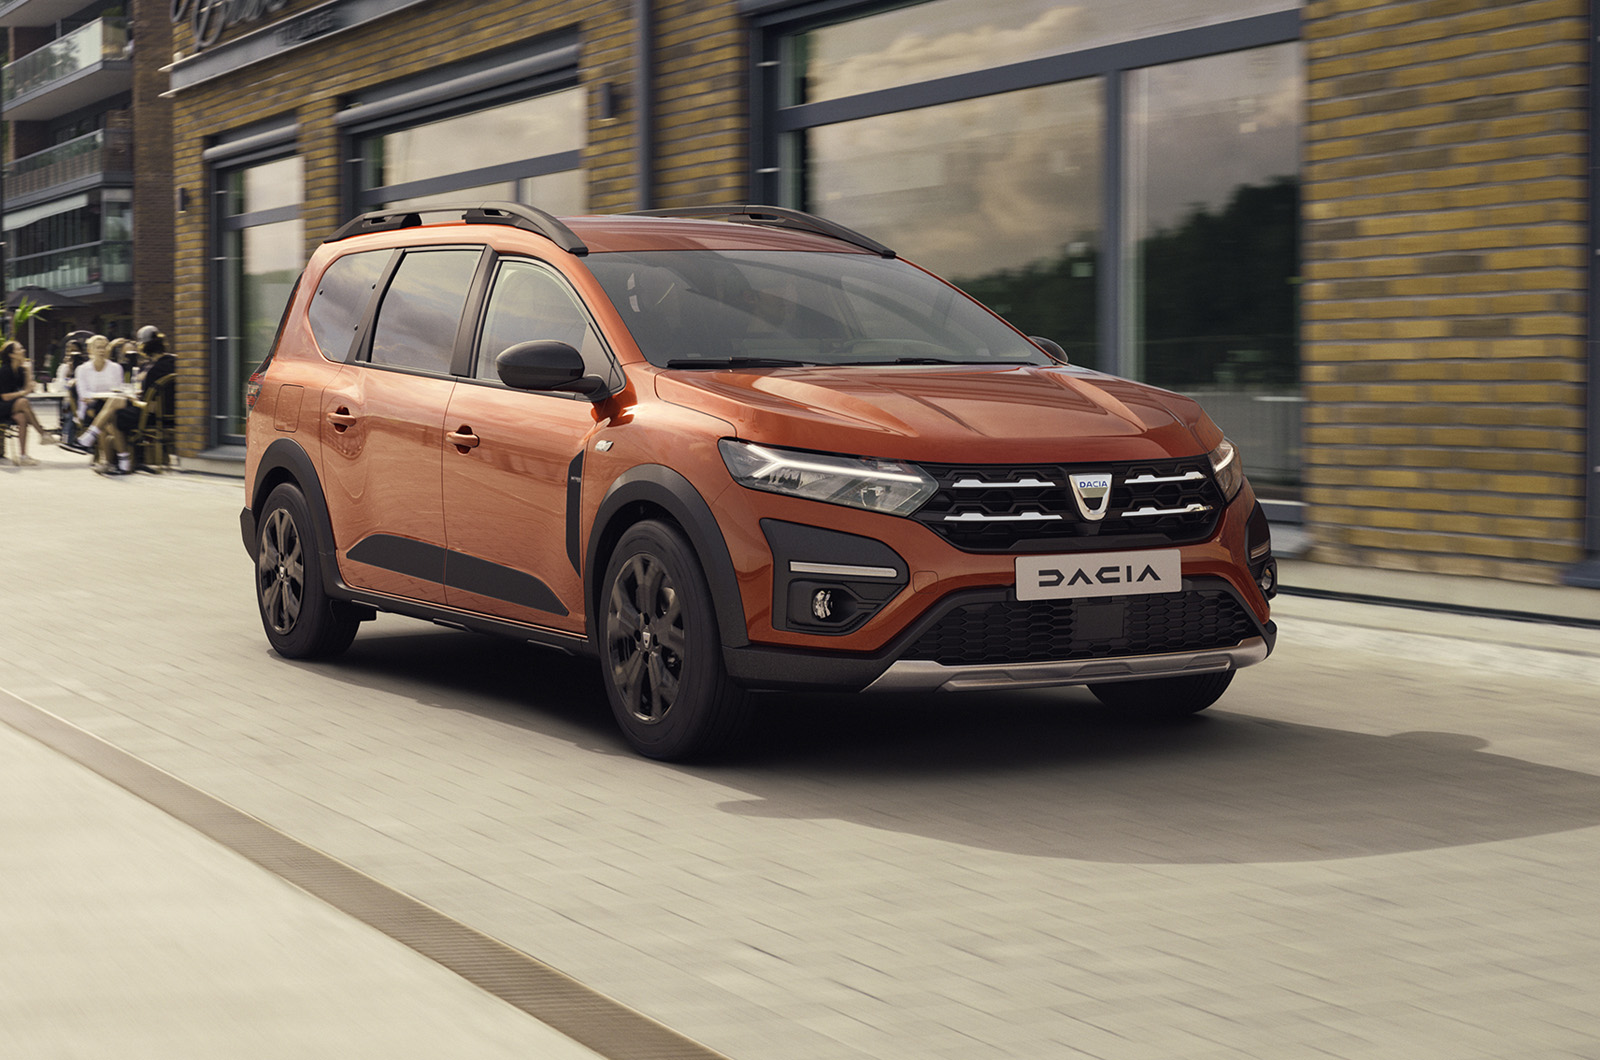 New 2022 Dacia Jogger is UK's cheapest seven-seater at £14,995